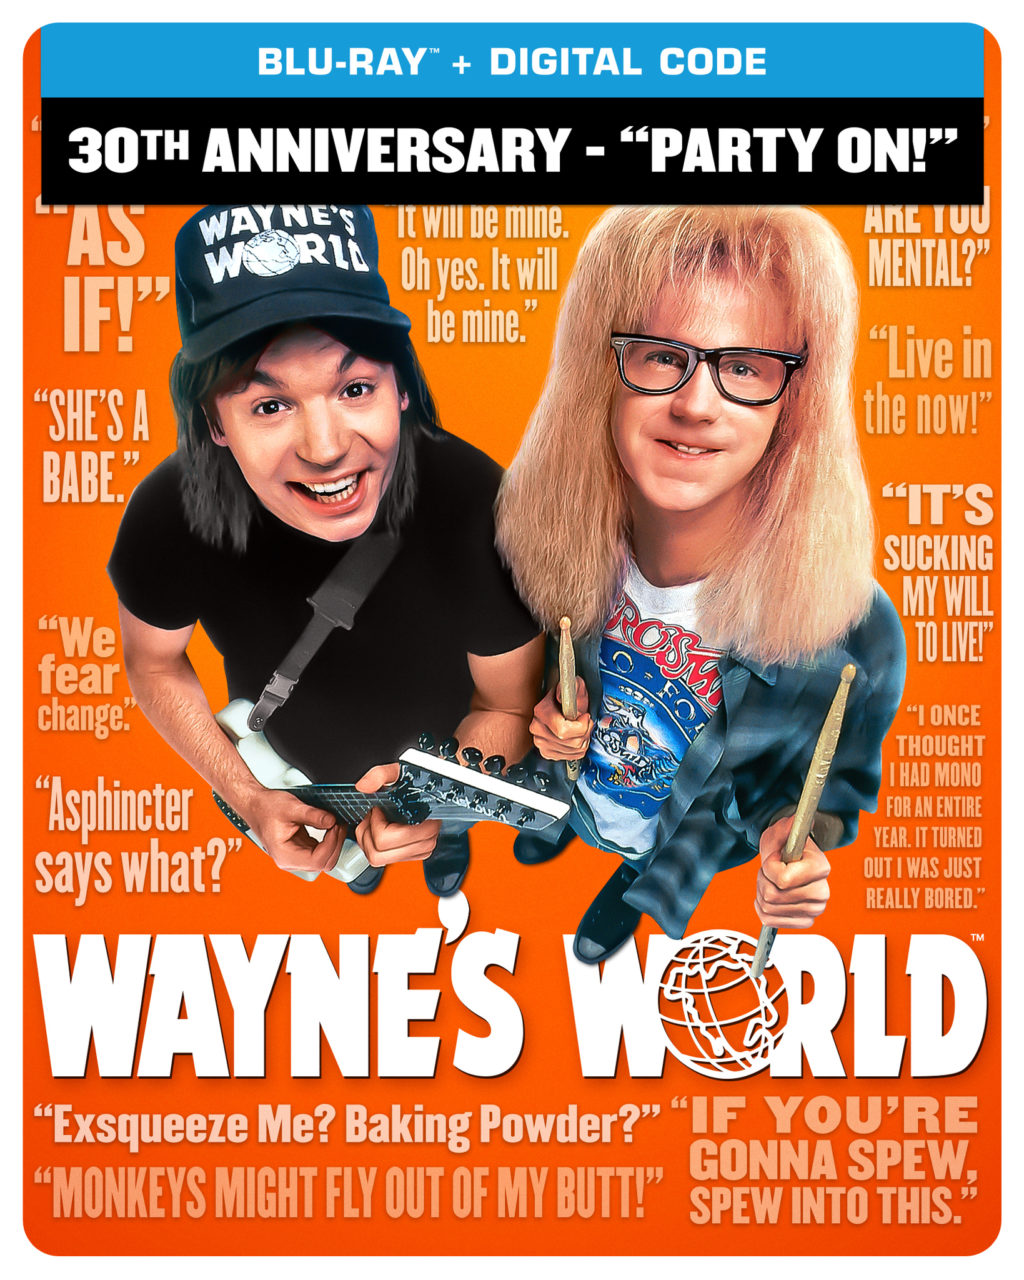 Wayne's World 30th Anniversary Blu-Ray Combo Pack cover (Paramount Pictures)